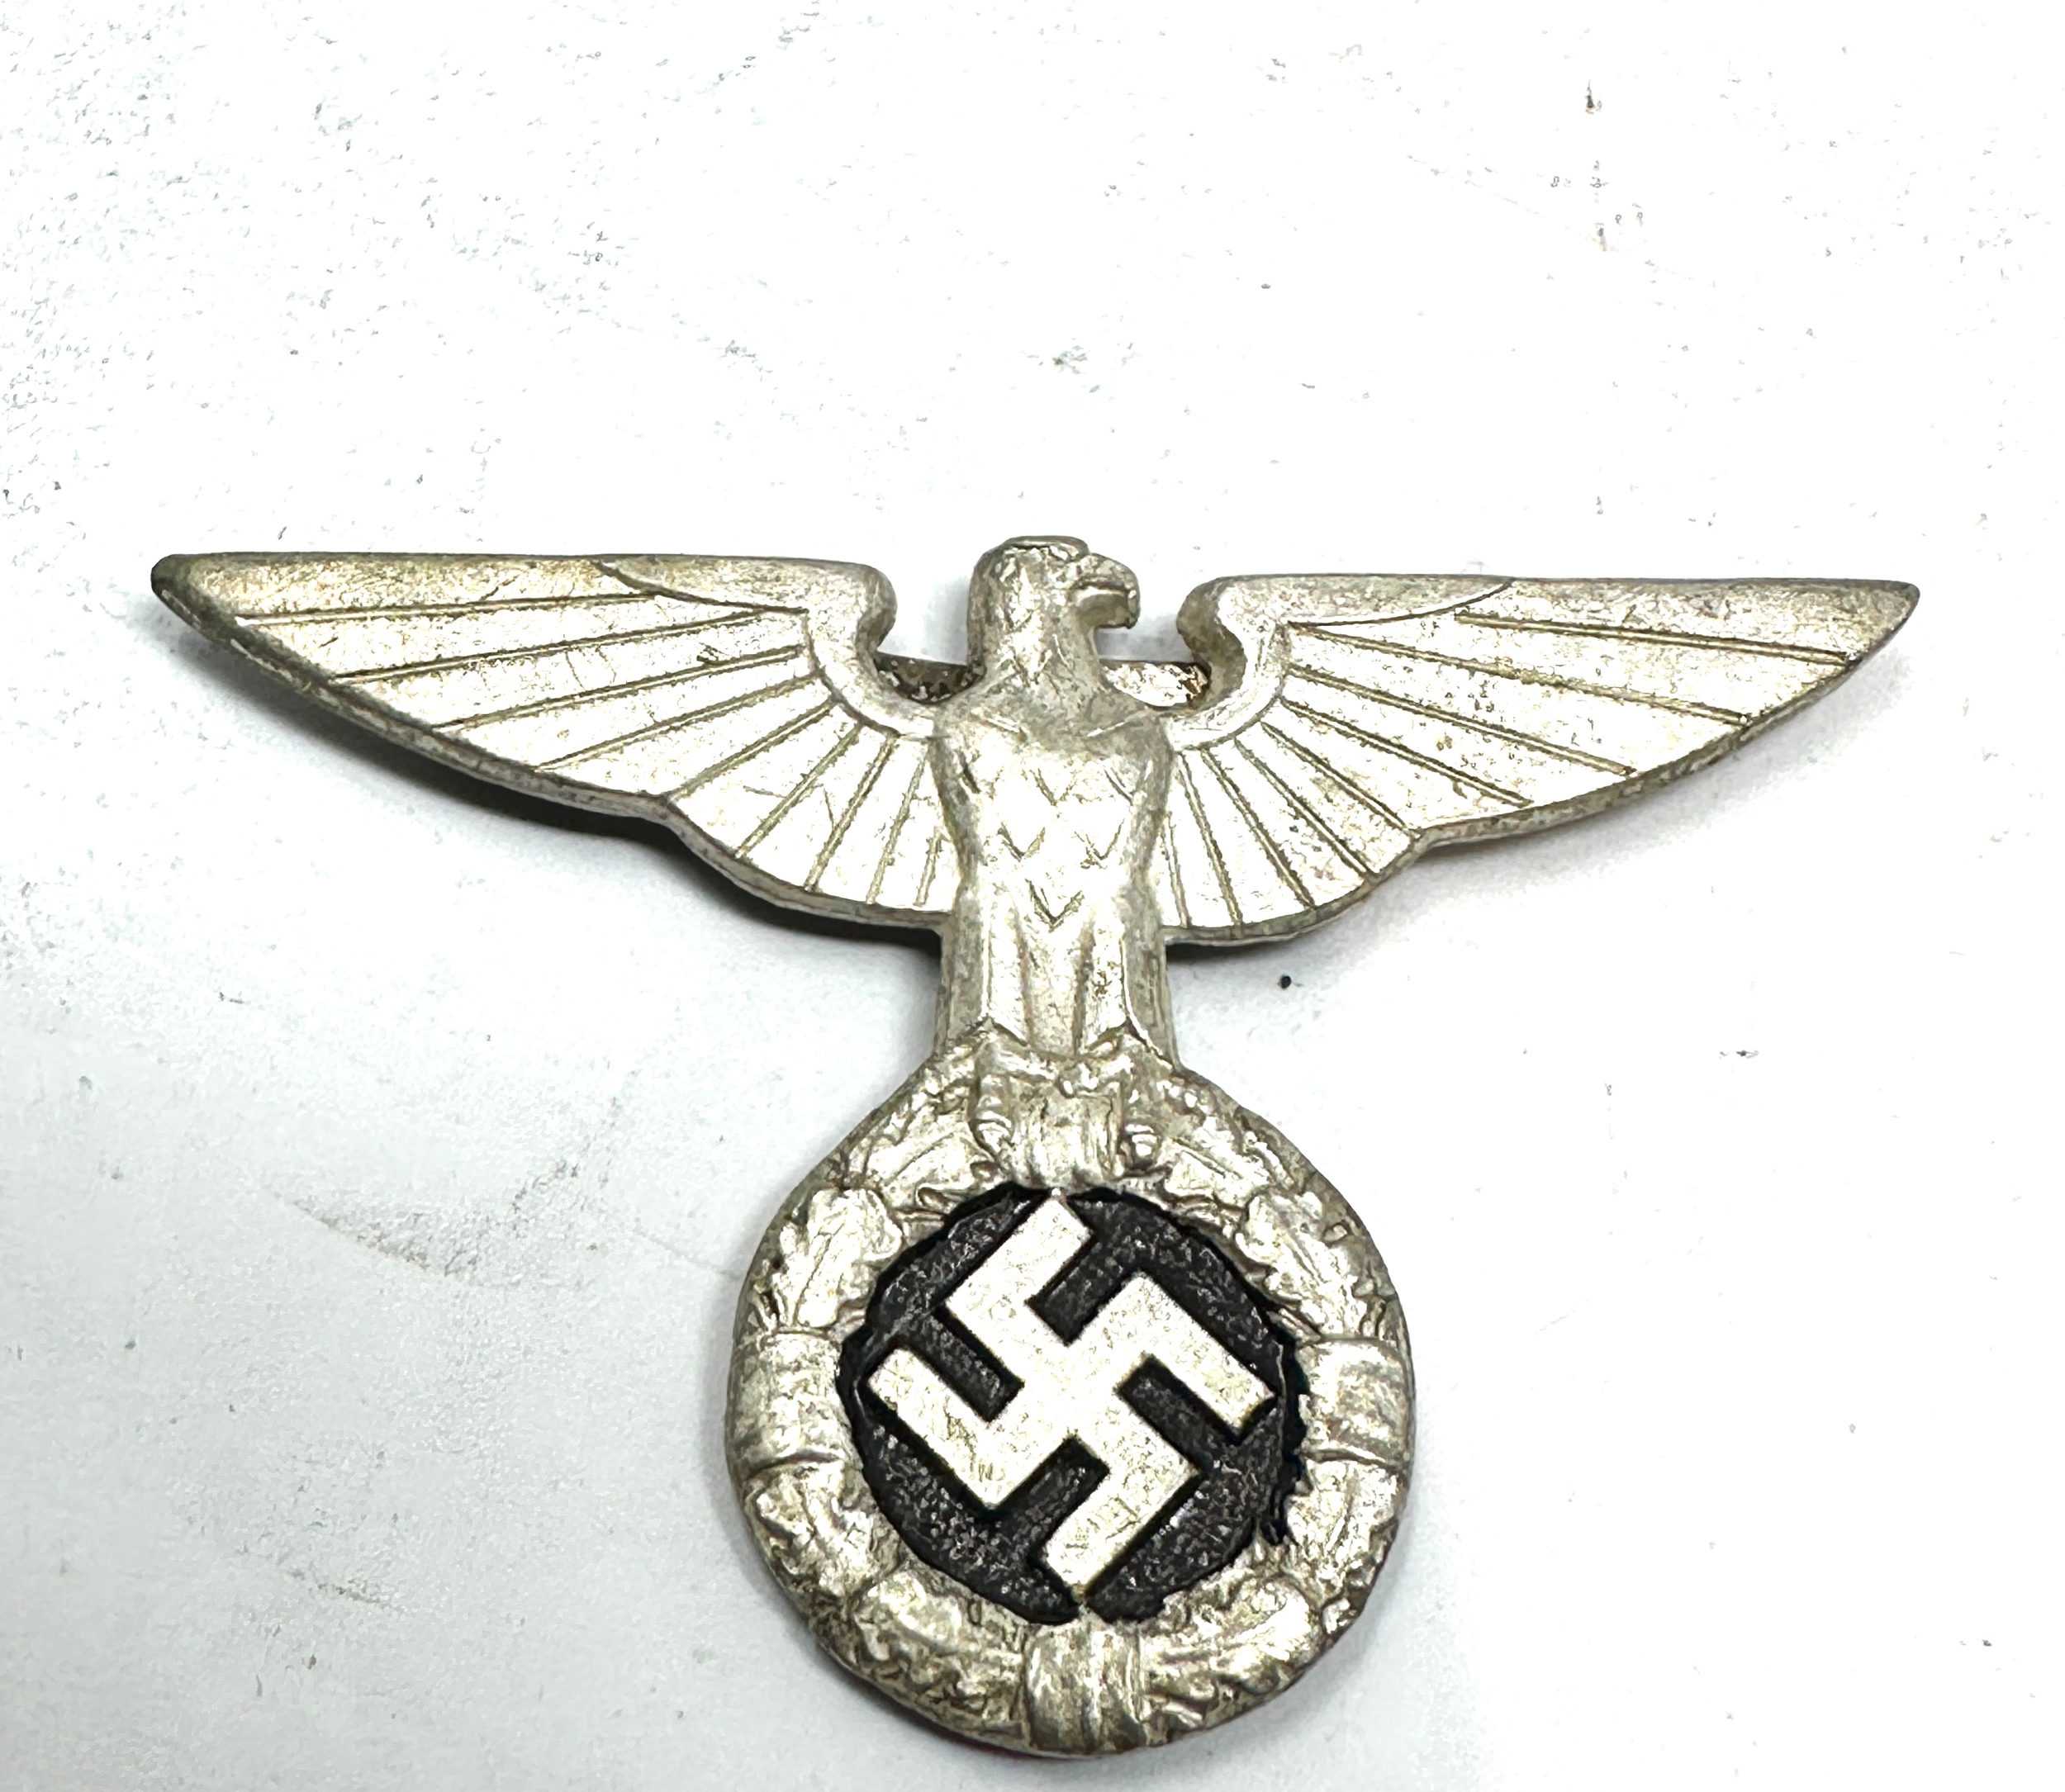 2 ww2 german iron crosses and cap eagle - Image 5 of 5